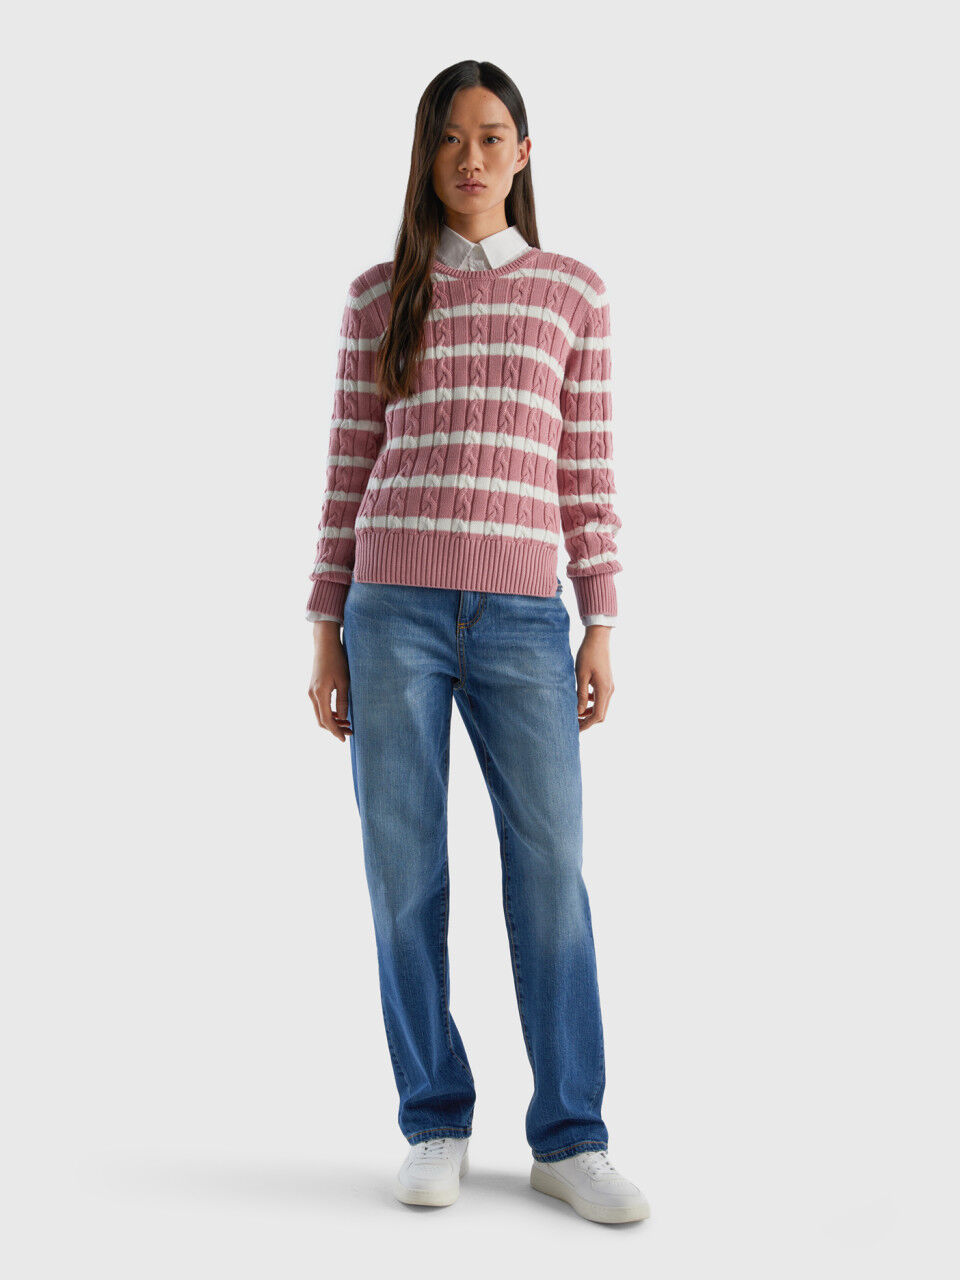 Cable knit sweater 100% cotton